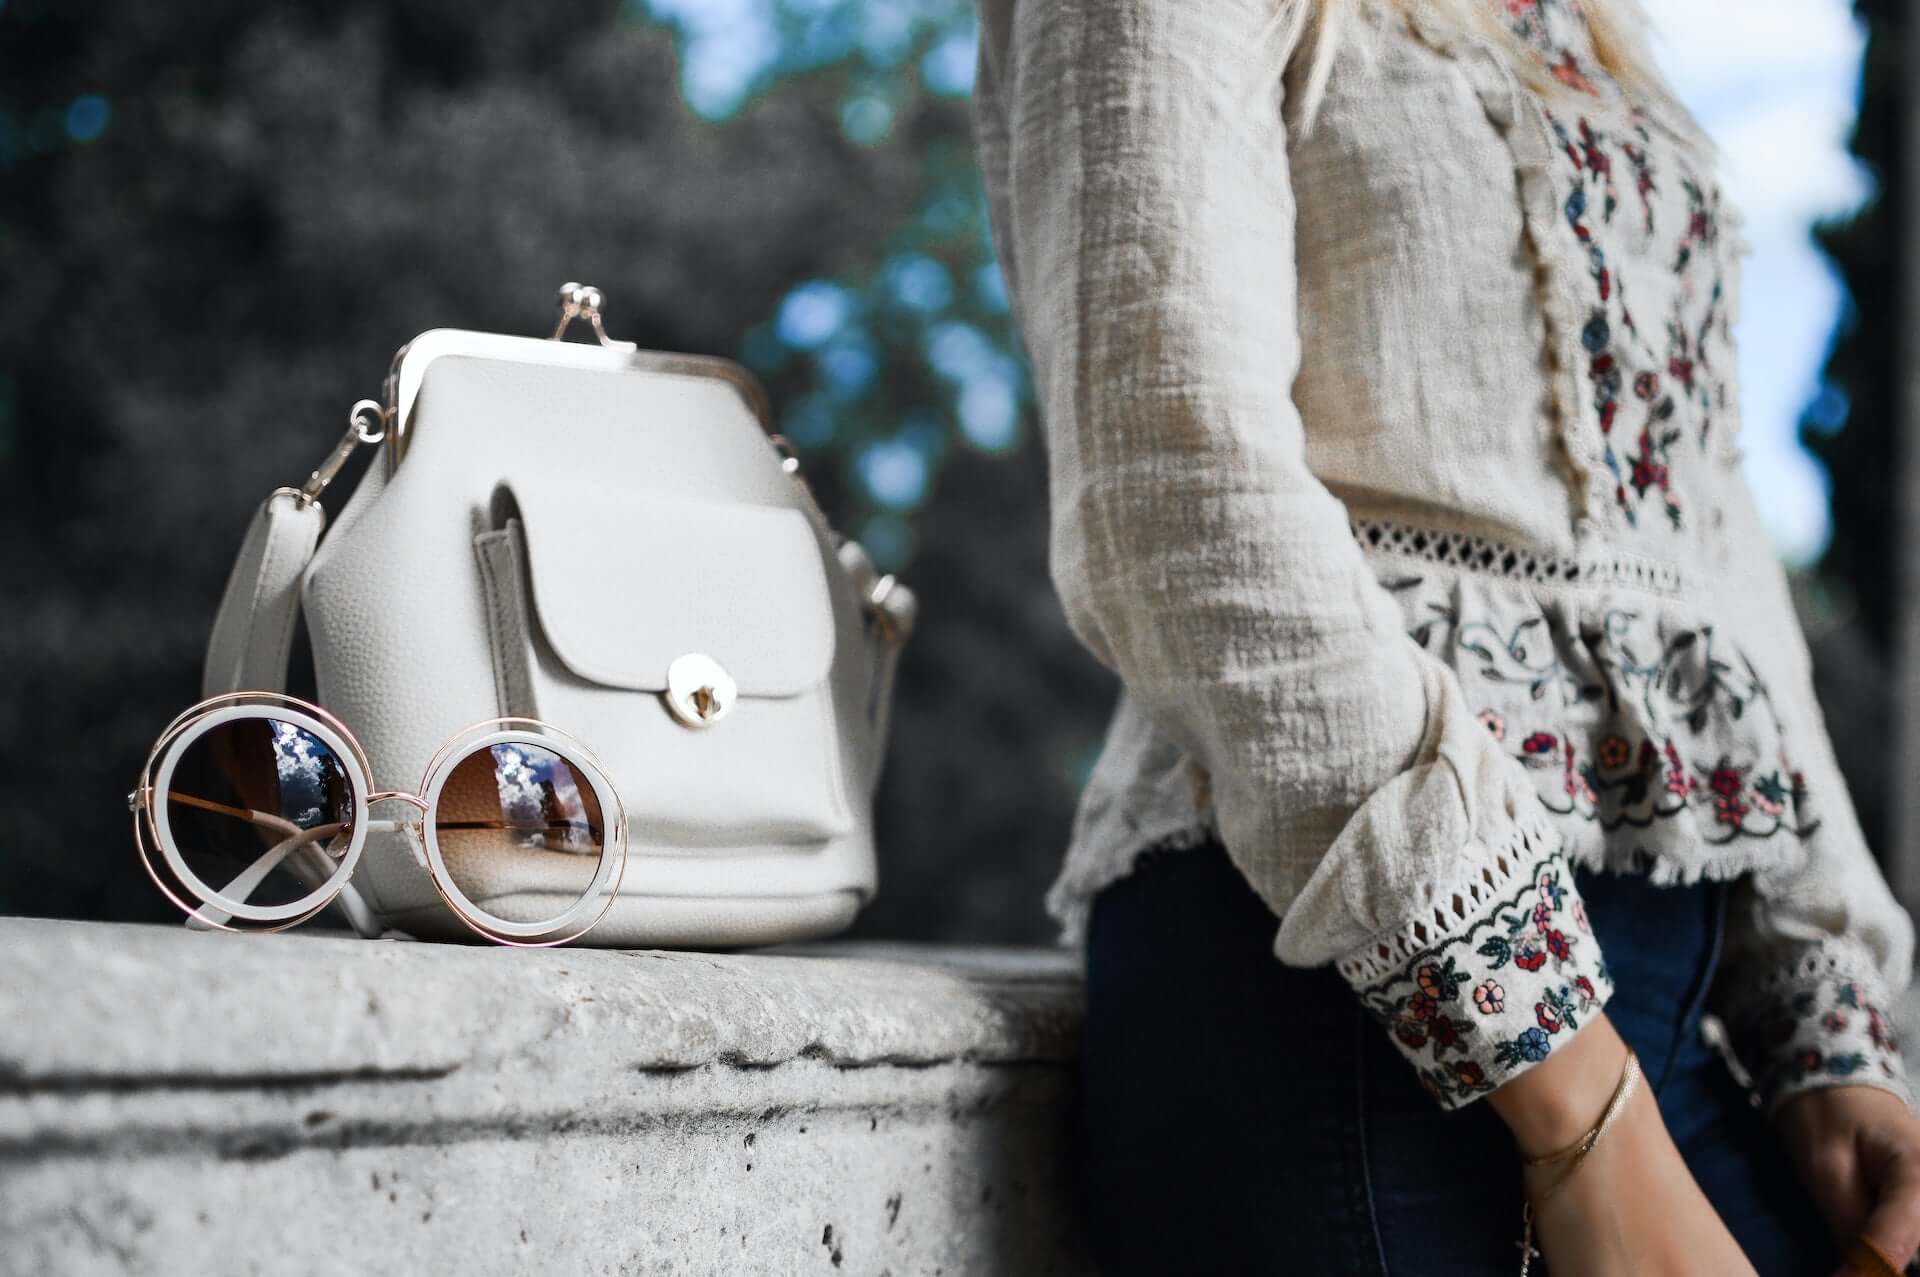 A woman in a flowing floral white top stands beside a white leather handbag and white round sunglasses.